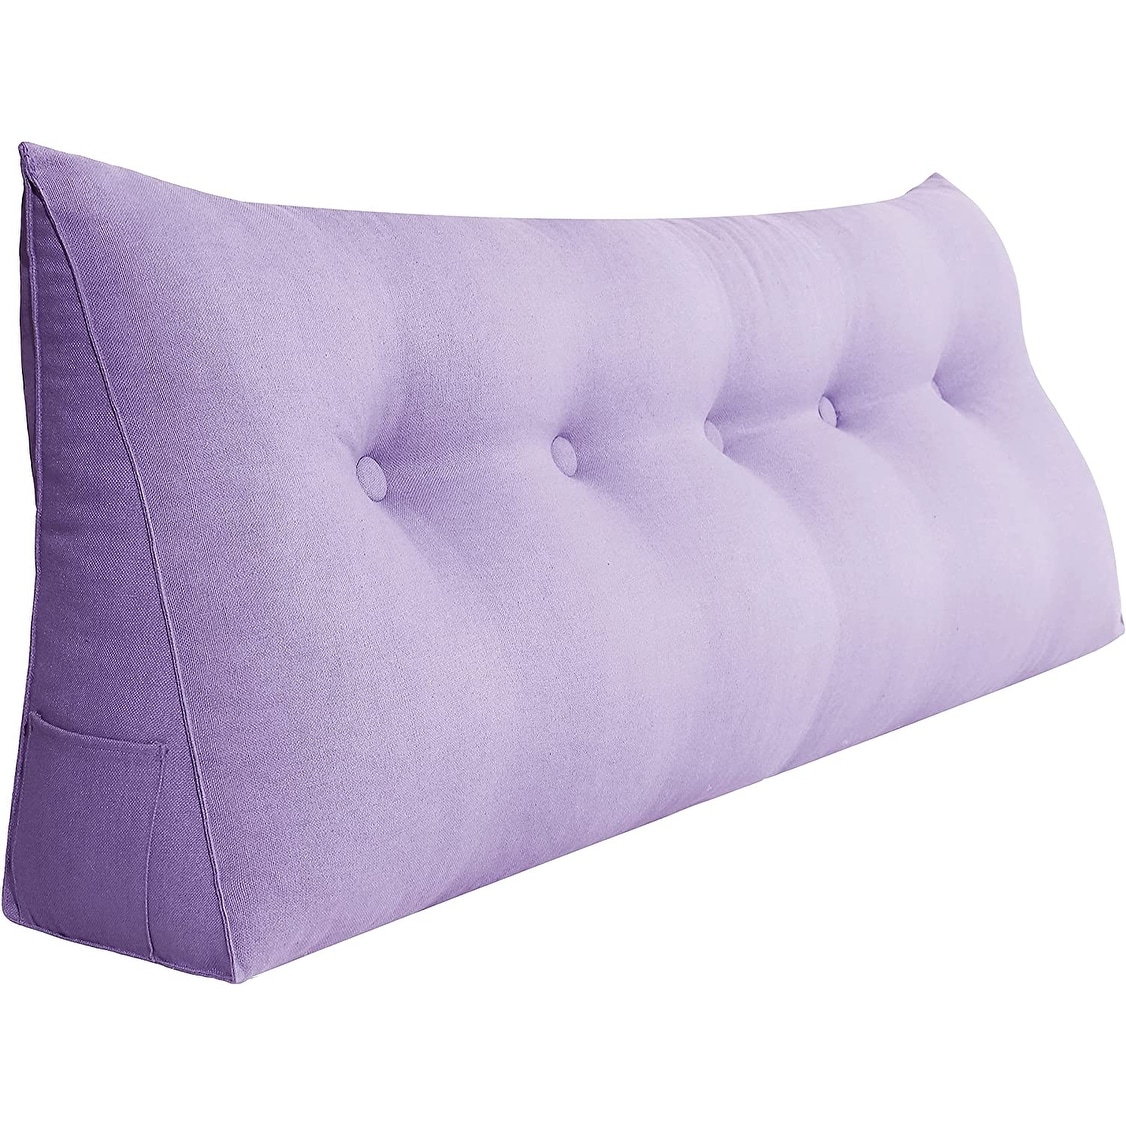 https://ak1.ostkcdn.com/images/products/is/images/direct/2aa04e67265620f2620864910fdb3c6f48a47a4a/WOWMAX-Bed-Rest-Reading-Wedge-Pillow-Back-Headboard-Protective-Cushion.jpg